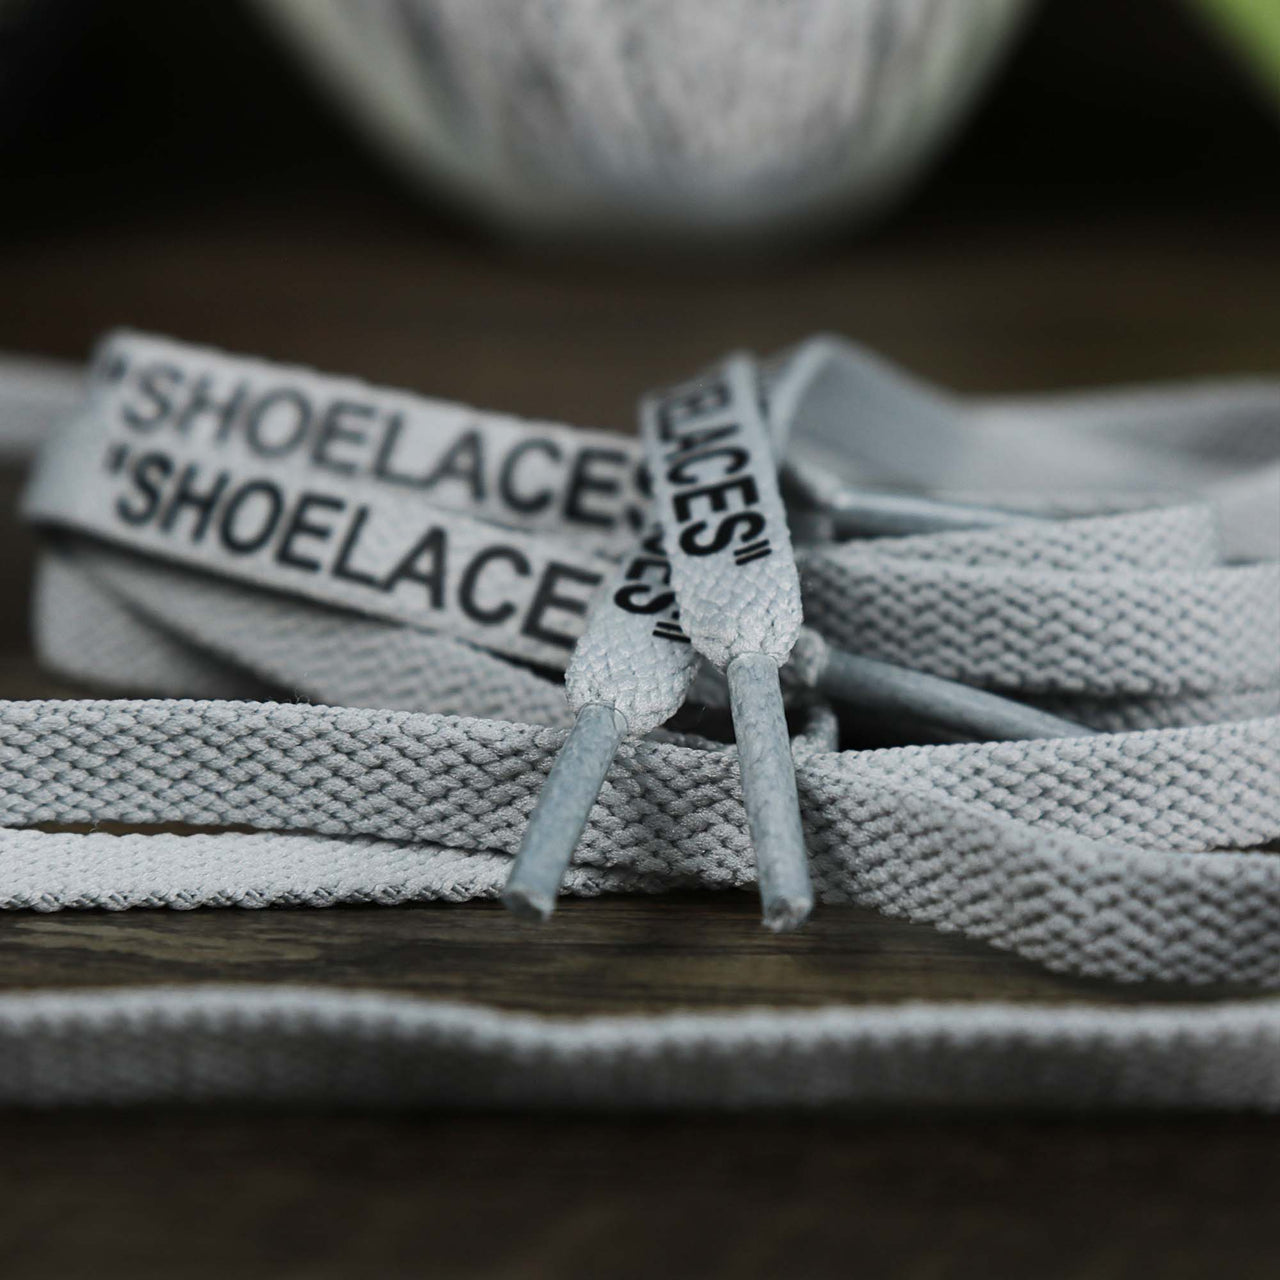 The aglets on the Flat Icey Grey Shoelaces with “Shoelaces” Print | 120cm Capswag